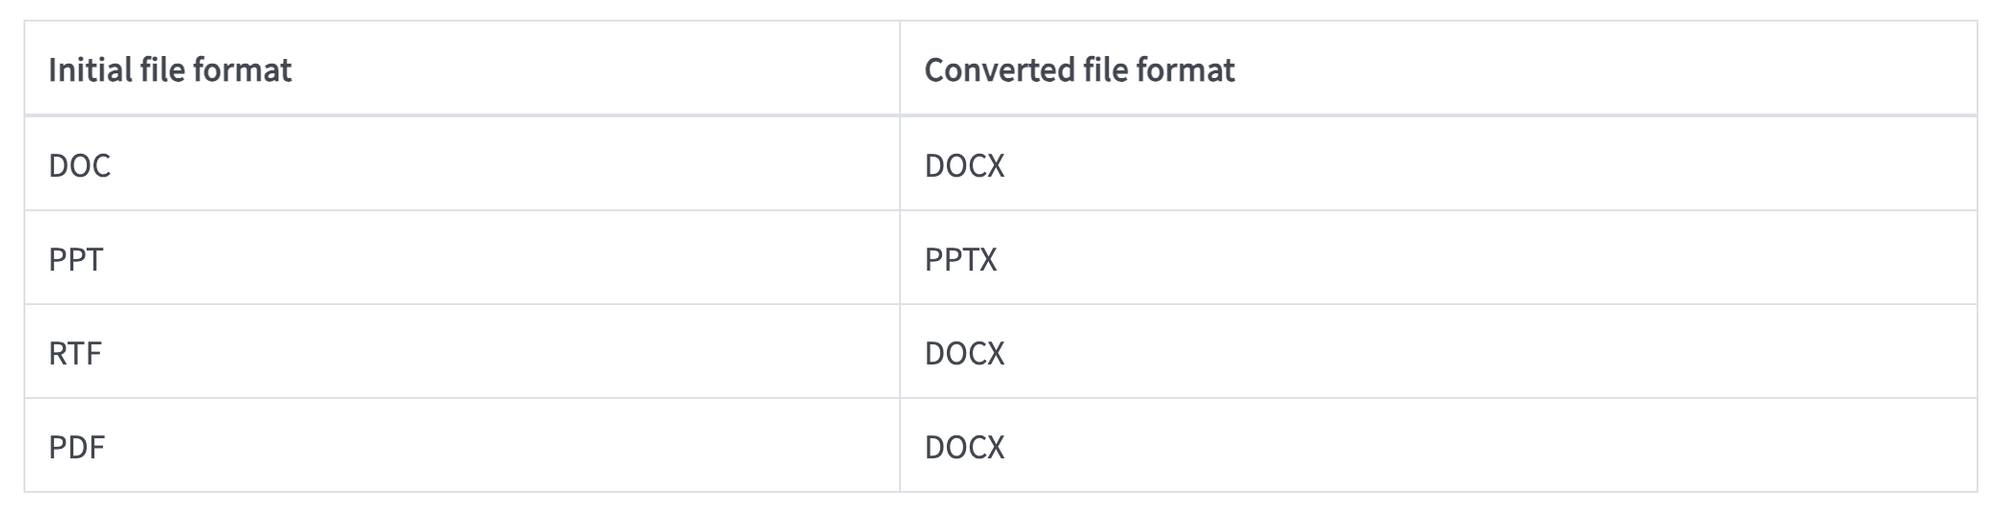 file-formats-table